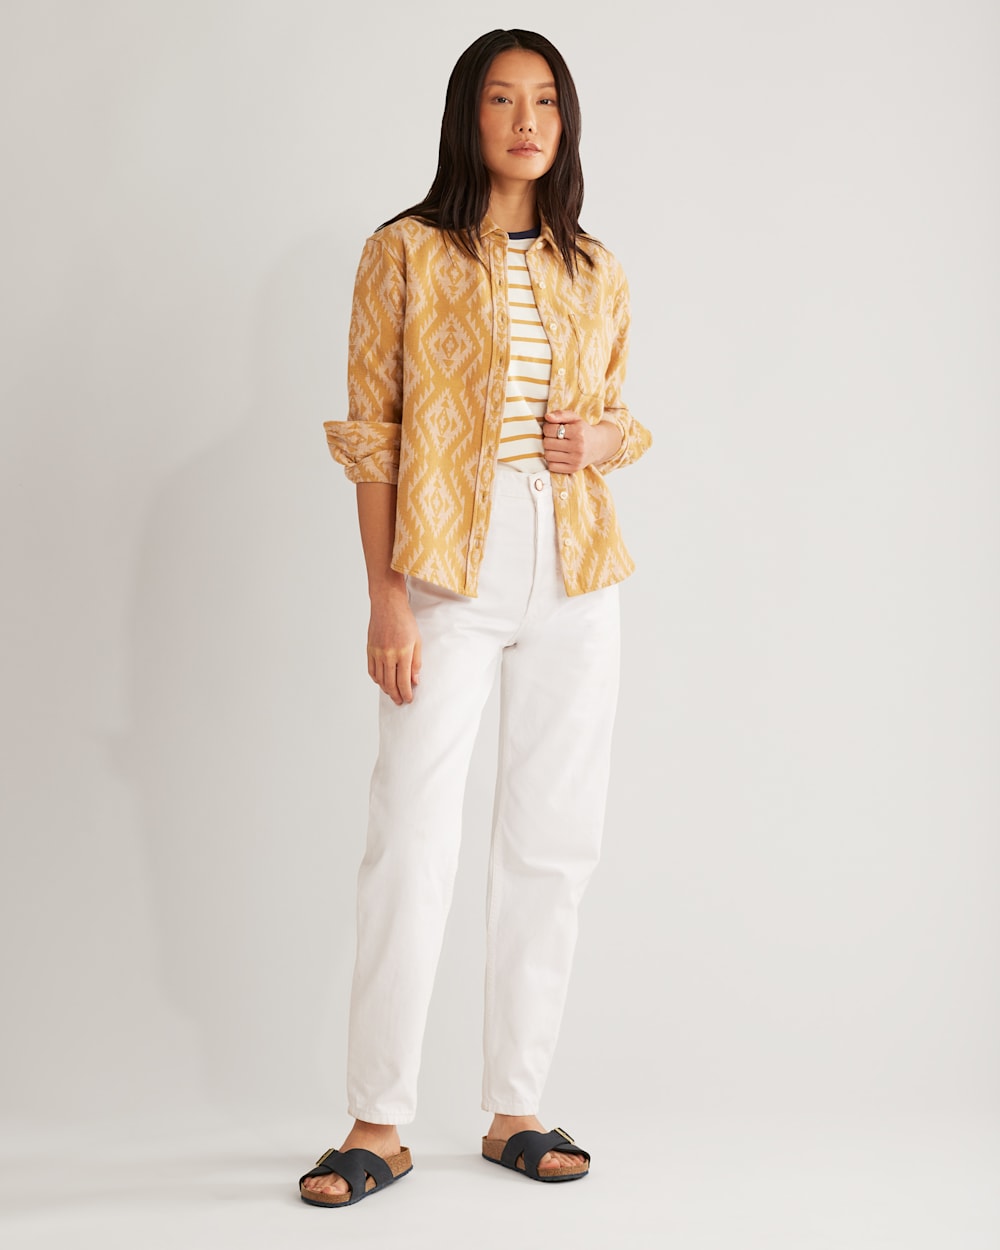 WOMEN'S DOUBLESOFT LONG BEACH SHIRT IN CURRY/BROWN SUGAR image number 1